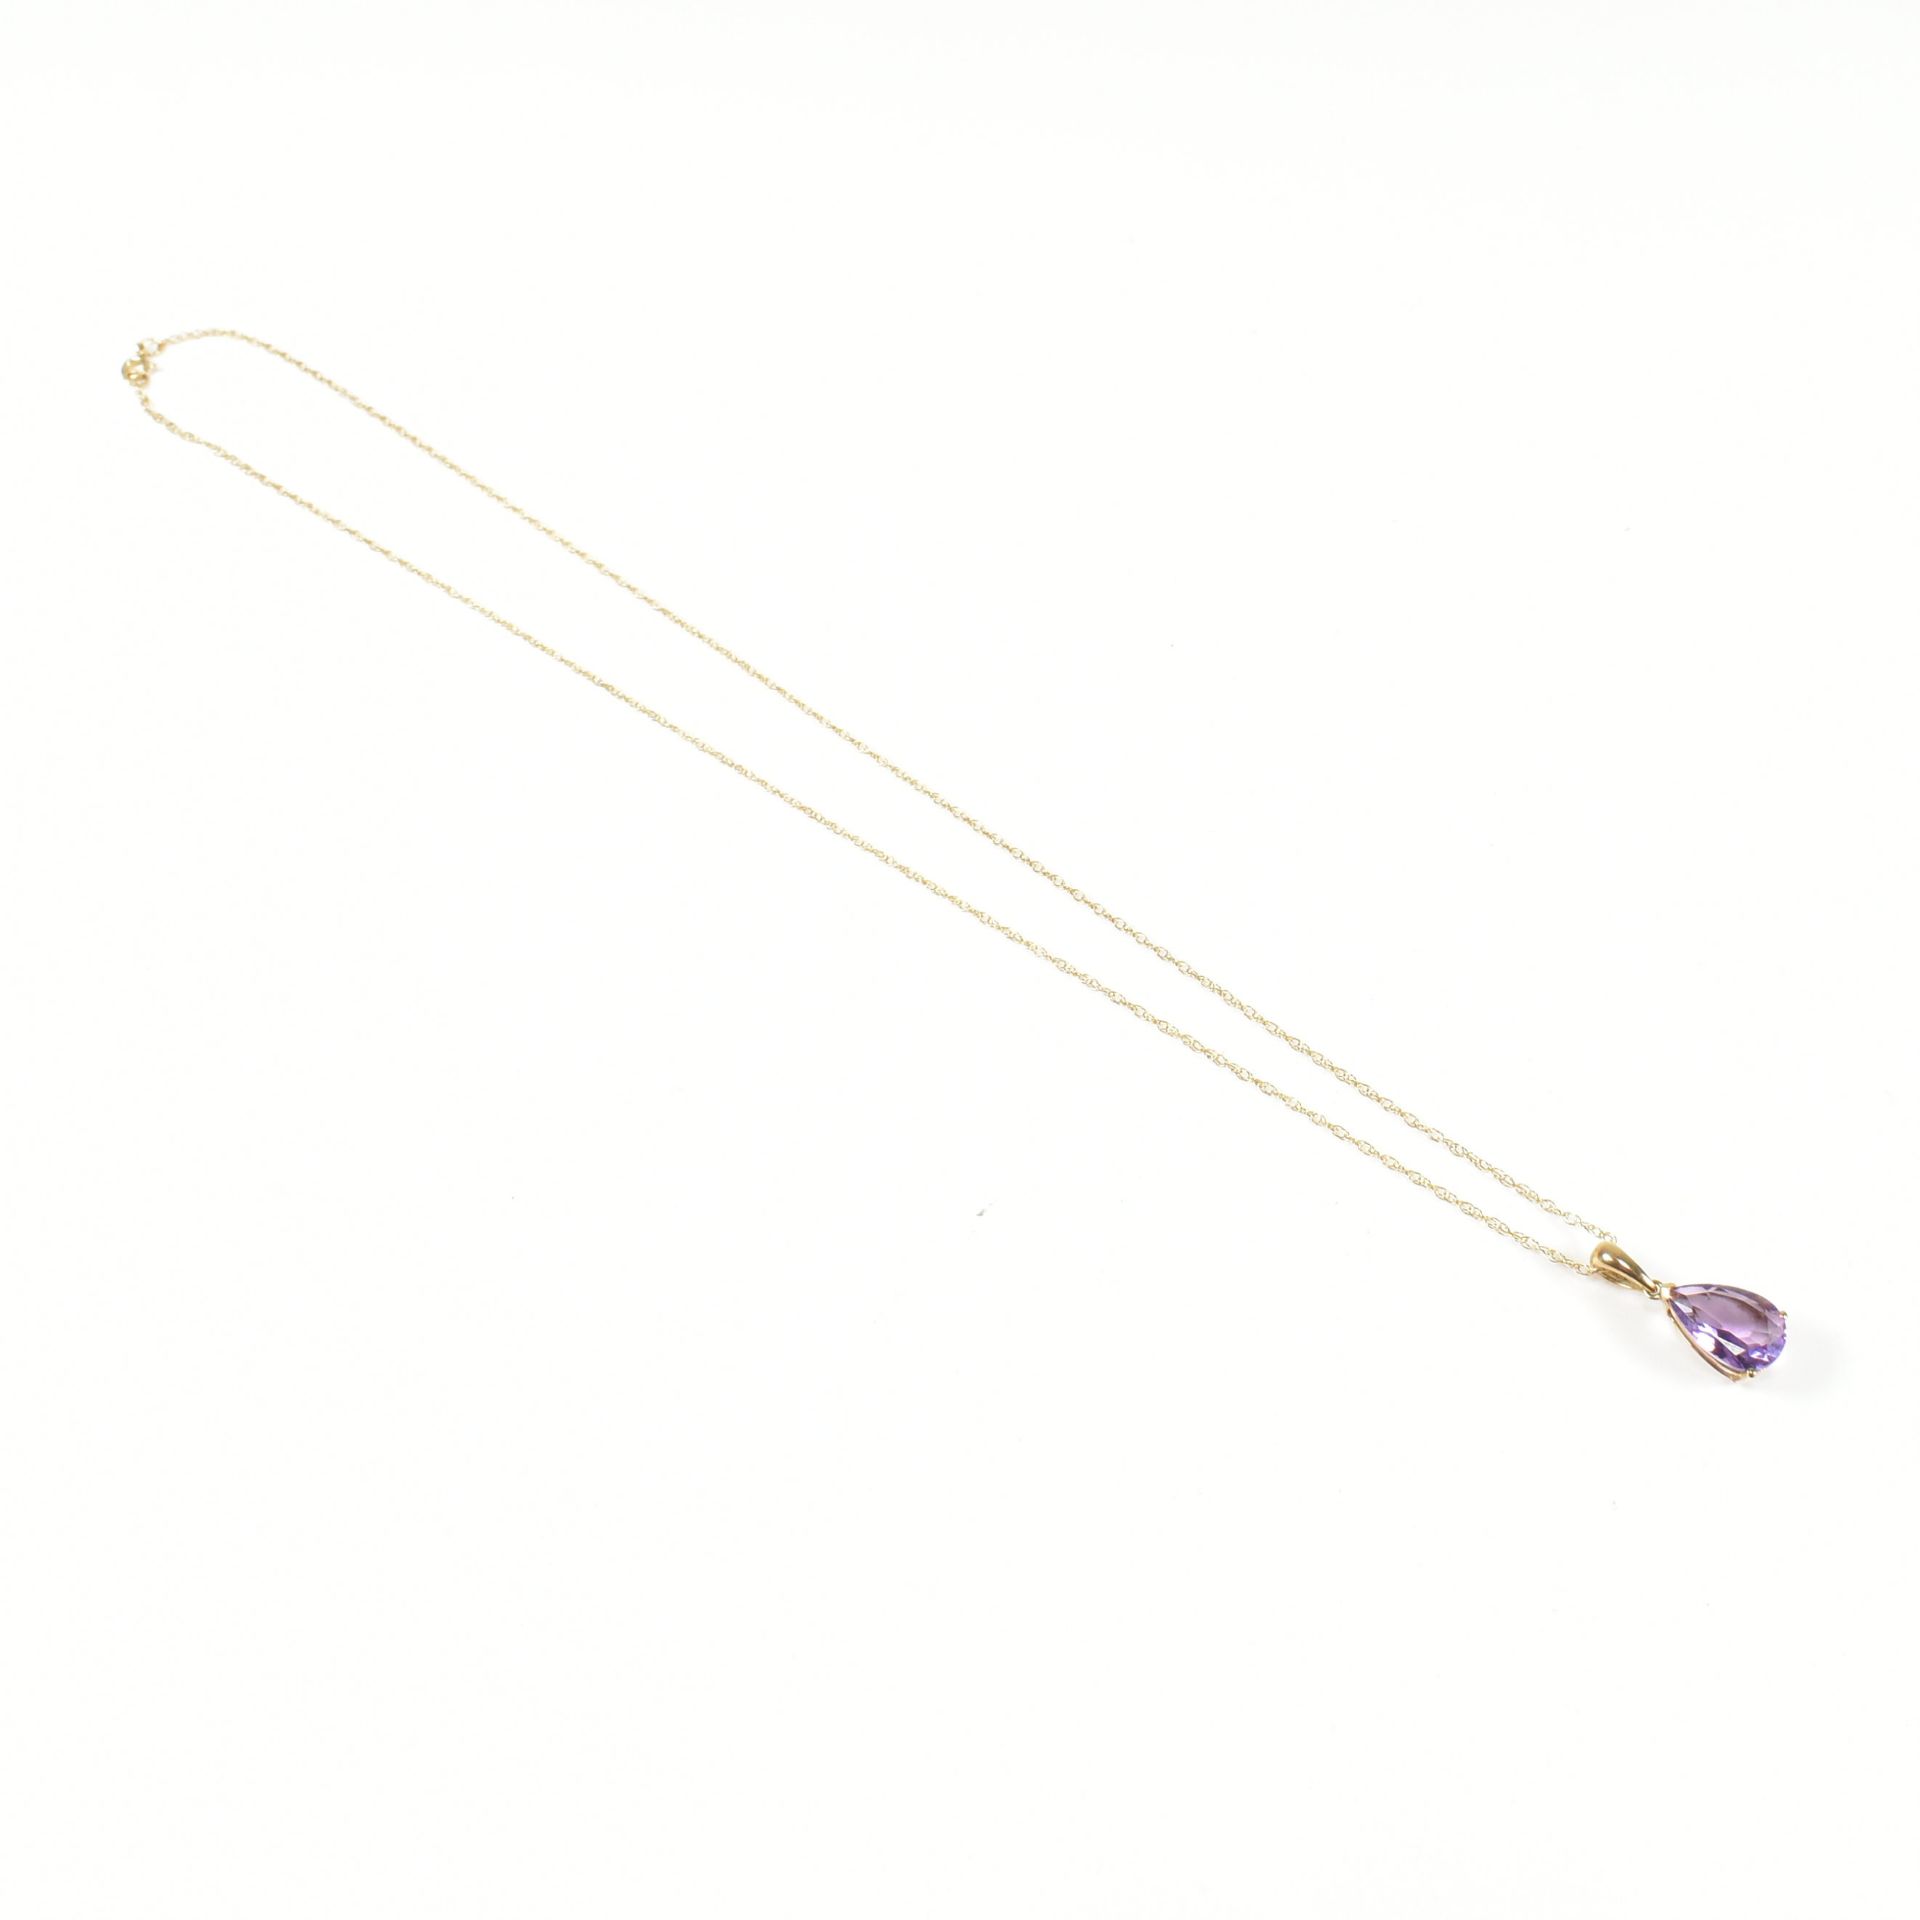 9CT GOLD & AMETHYST PENDANT NECKLACE - Image 2 of 4